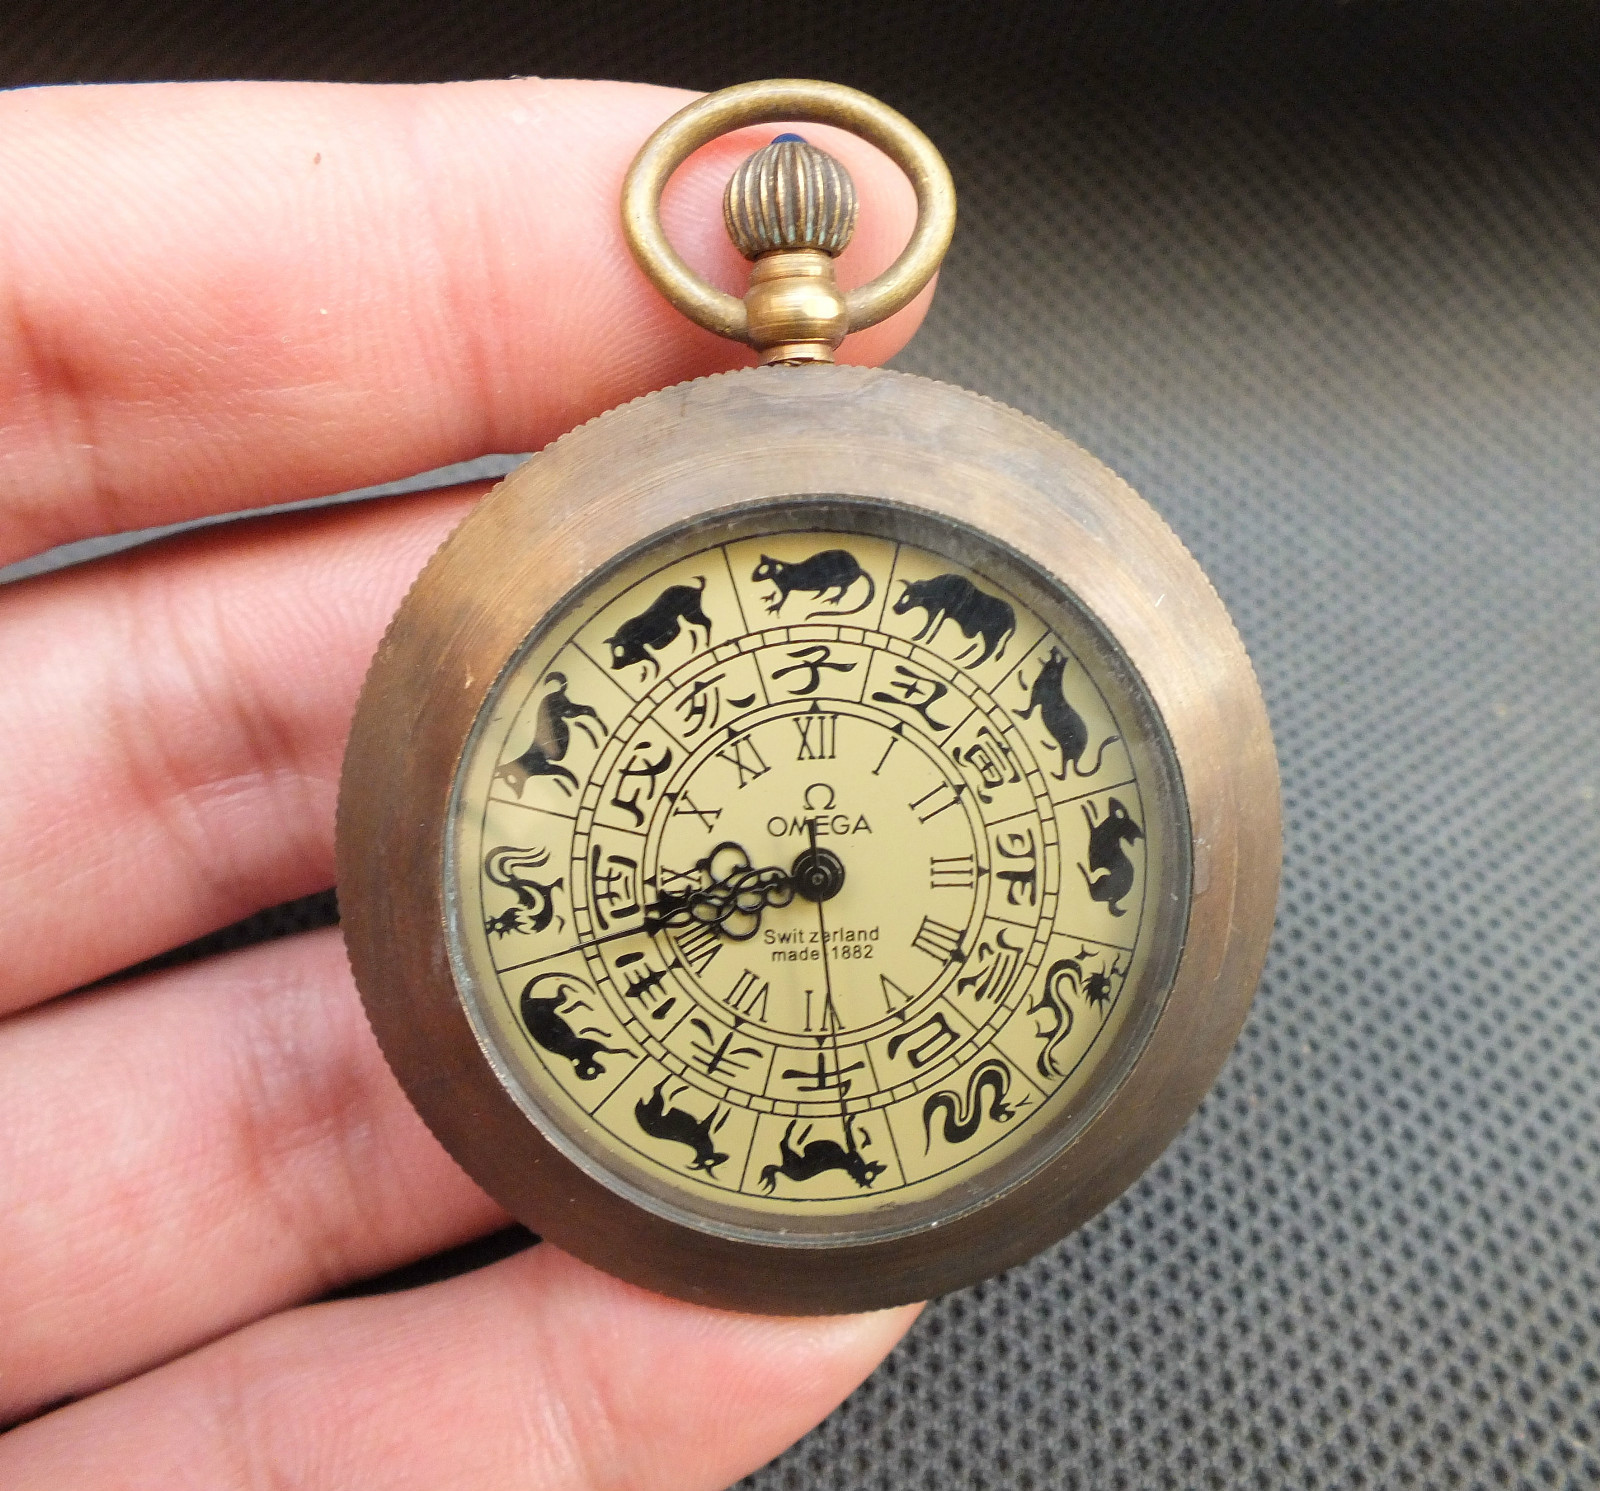 838561d1349339335 chinese zodiac omega pocketwatch 24 kgrhqrhjfme916qnbucbpid5dpozw60 57